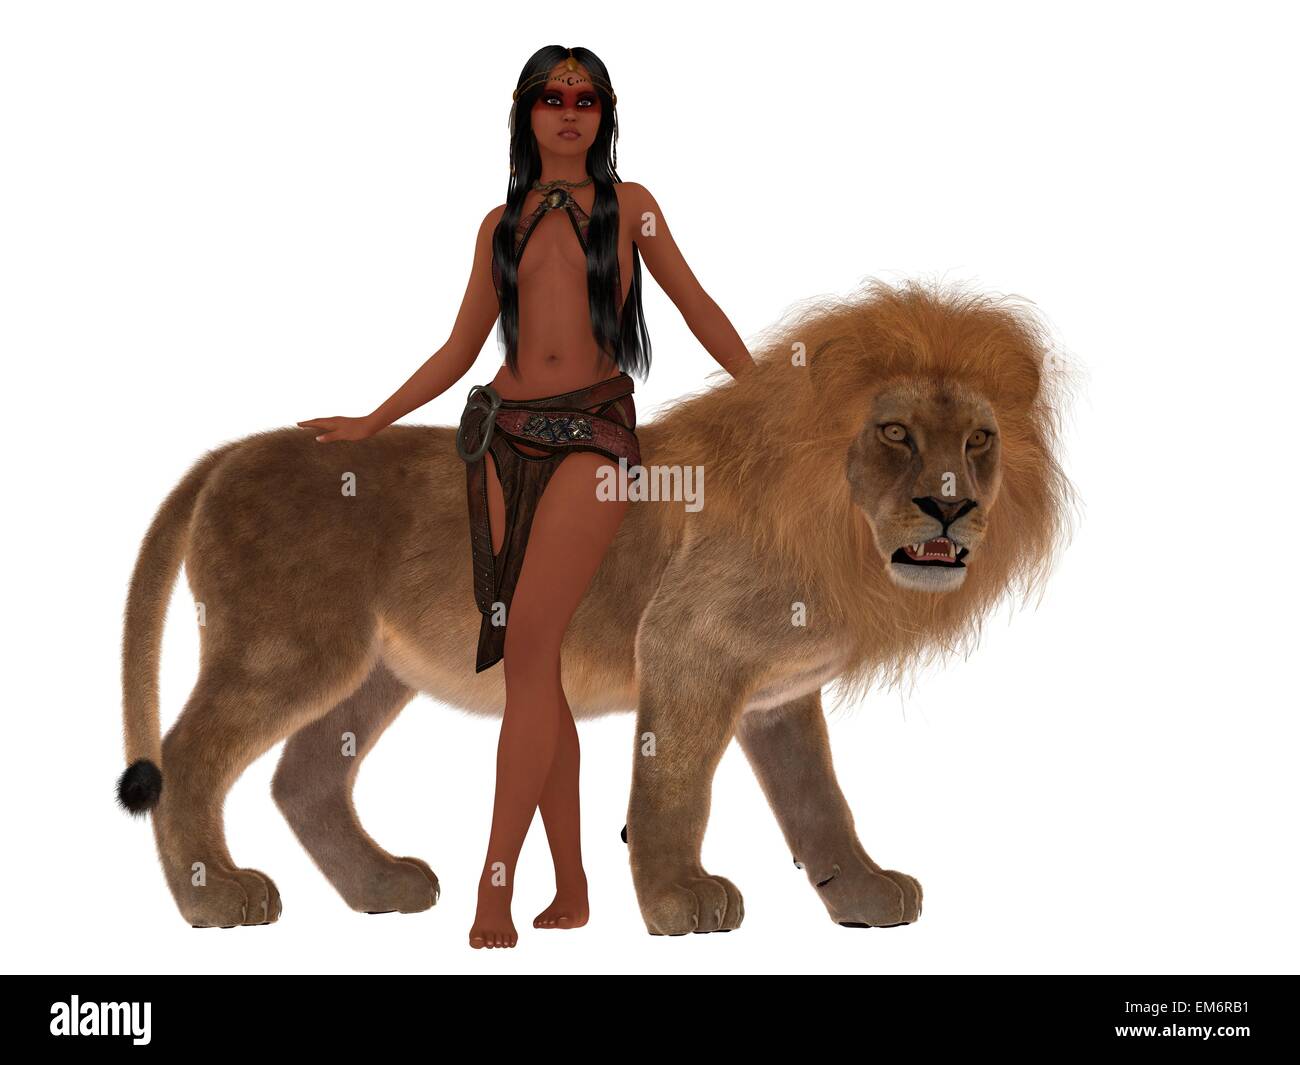 Exotic dark skinned female in skimpy leather outfit standing with pet lion Stock Photo